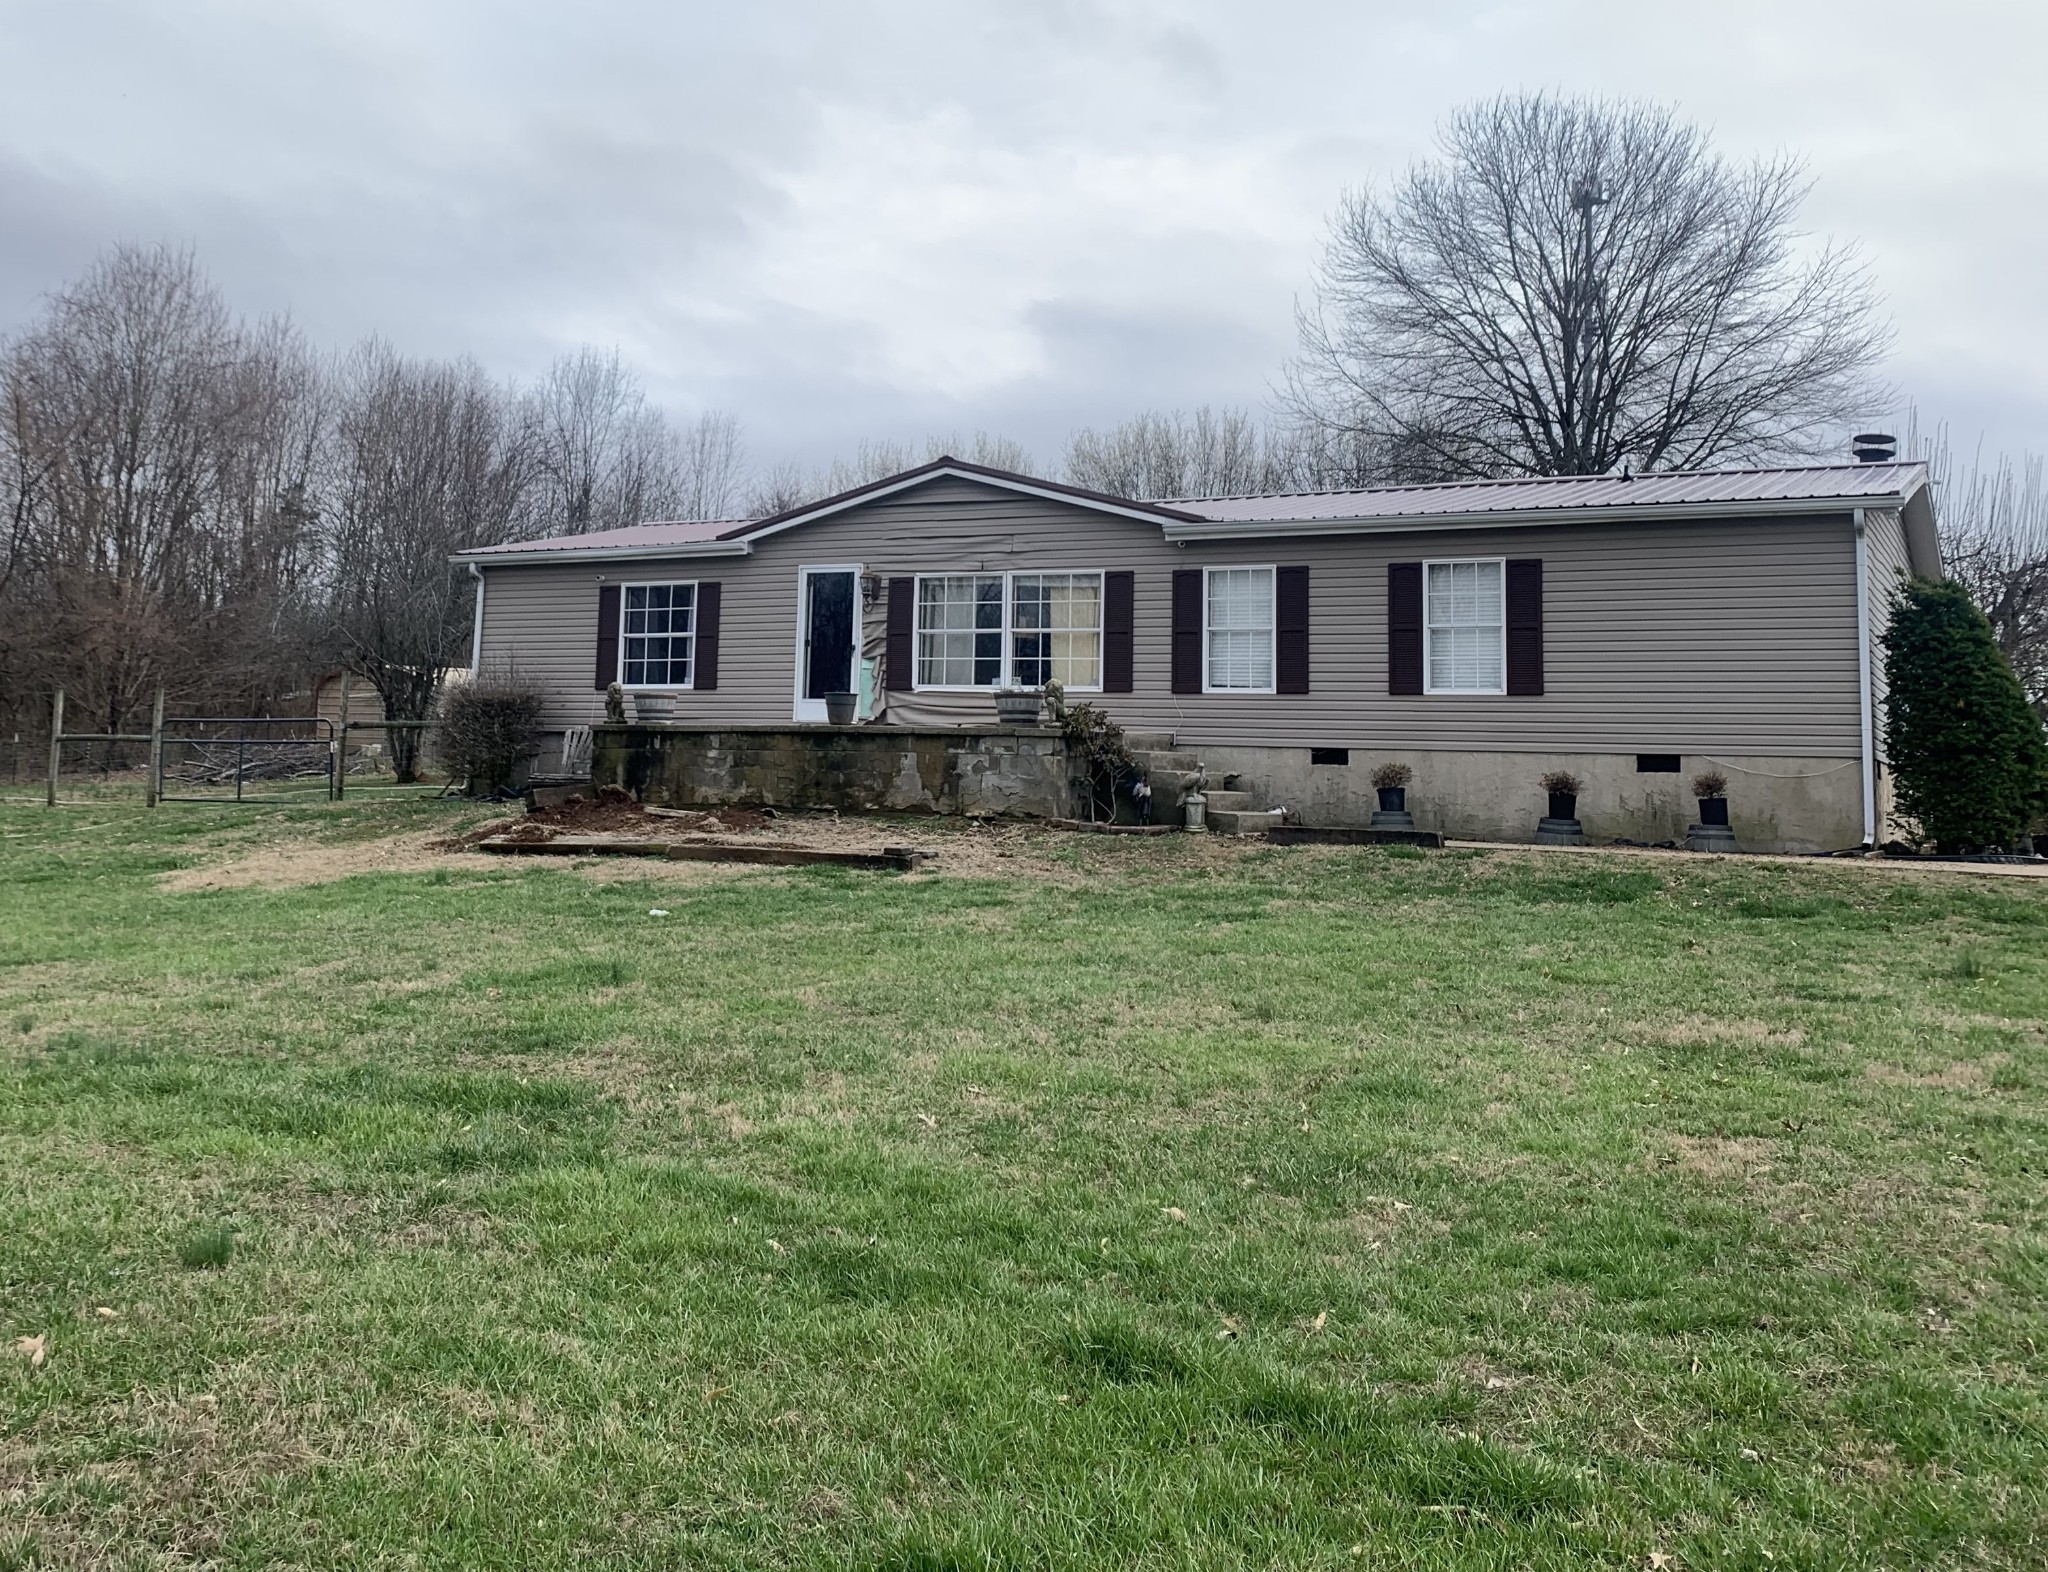 11899 Mona Rd, Murfreesboro, Tennessee, 37129, United States, ,Residential,For Sale,11899 Mona Rd,1480019